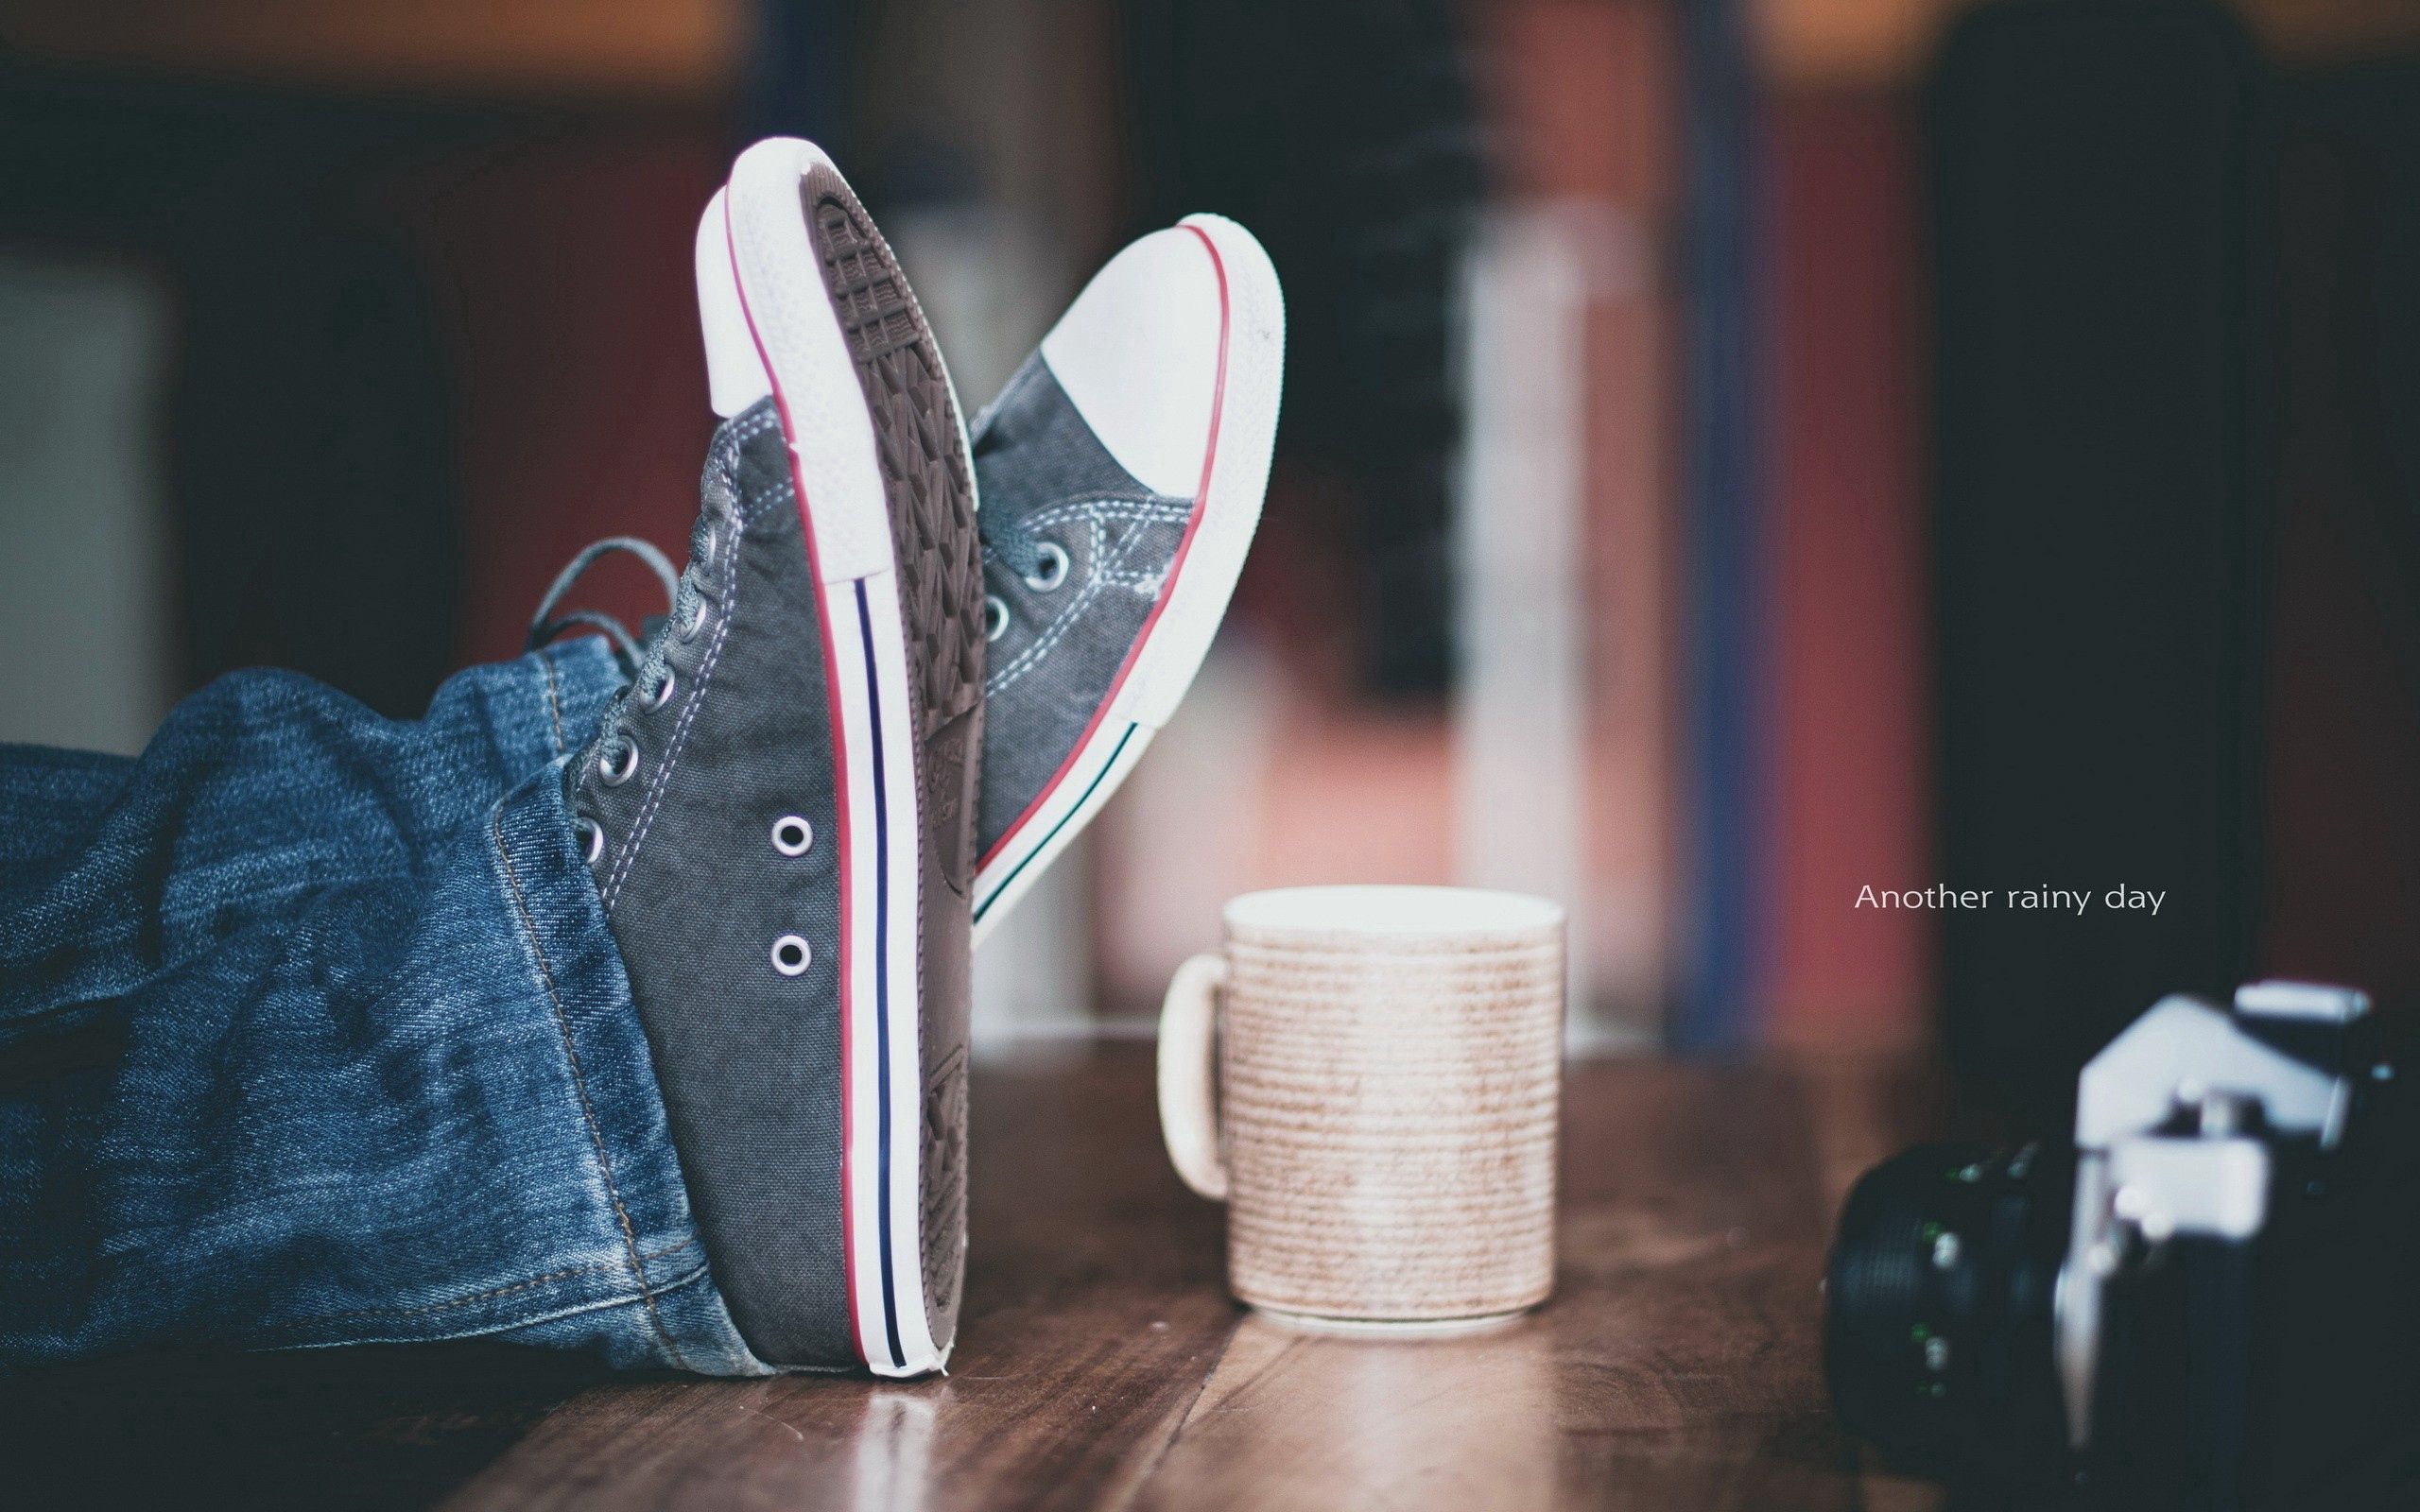 miscellanea, miscellaneous, legs, sneakers, cup, mood, shoes